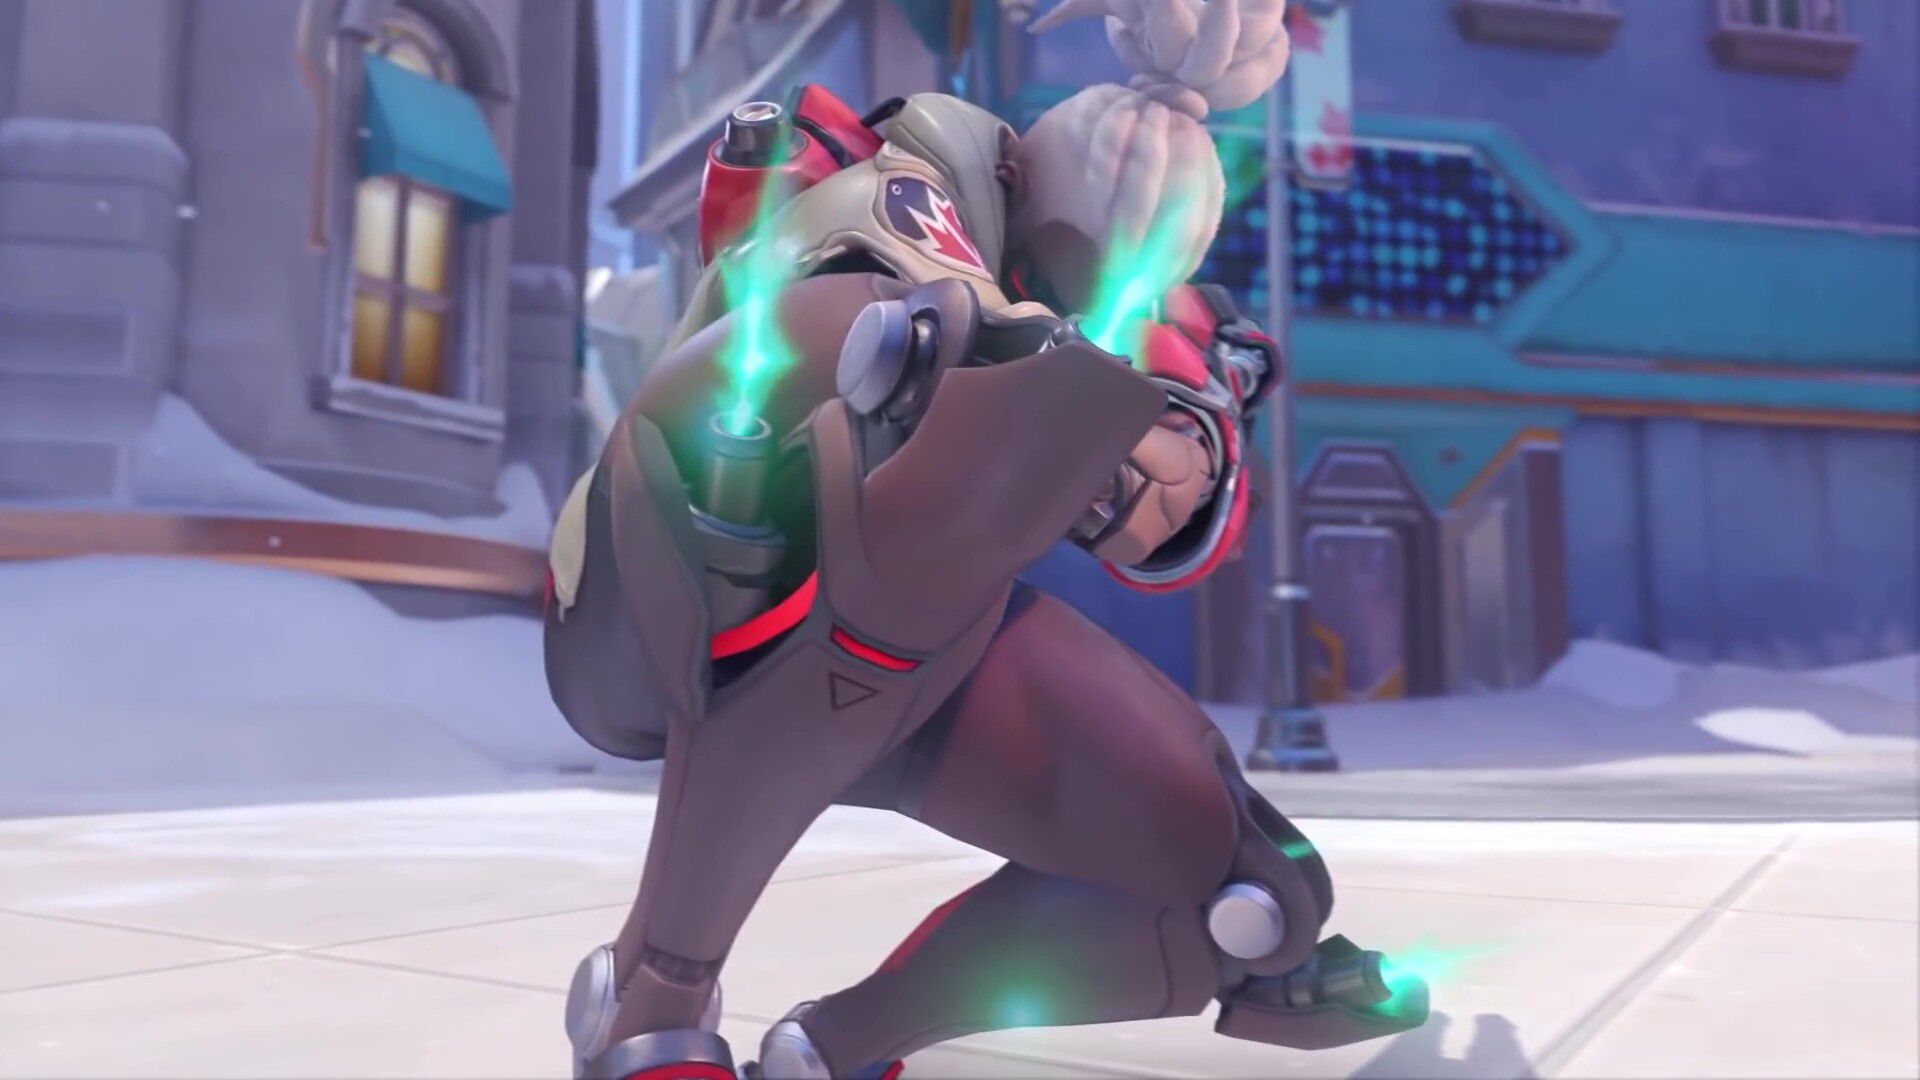 "Sojoan", a new character with a powerful rocket-equipped thigh with a whip whip of the Overwatch 2 machine 23